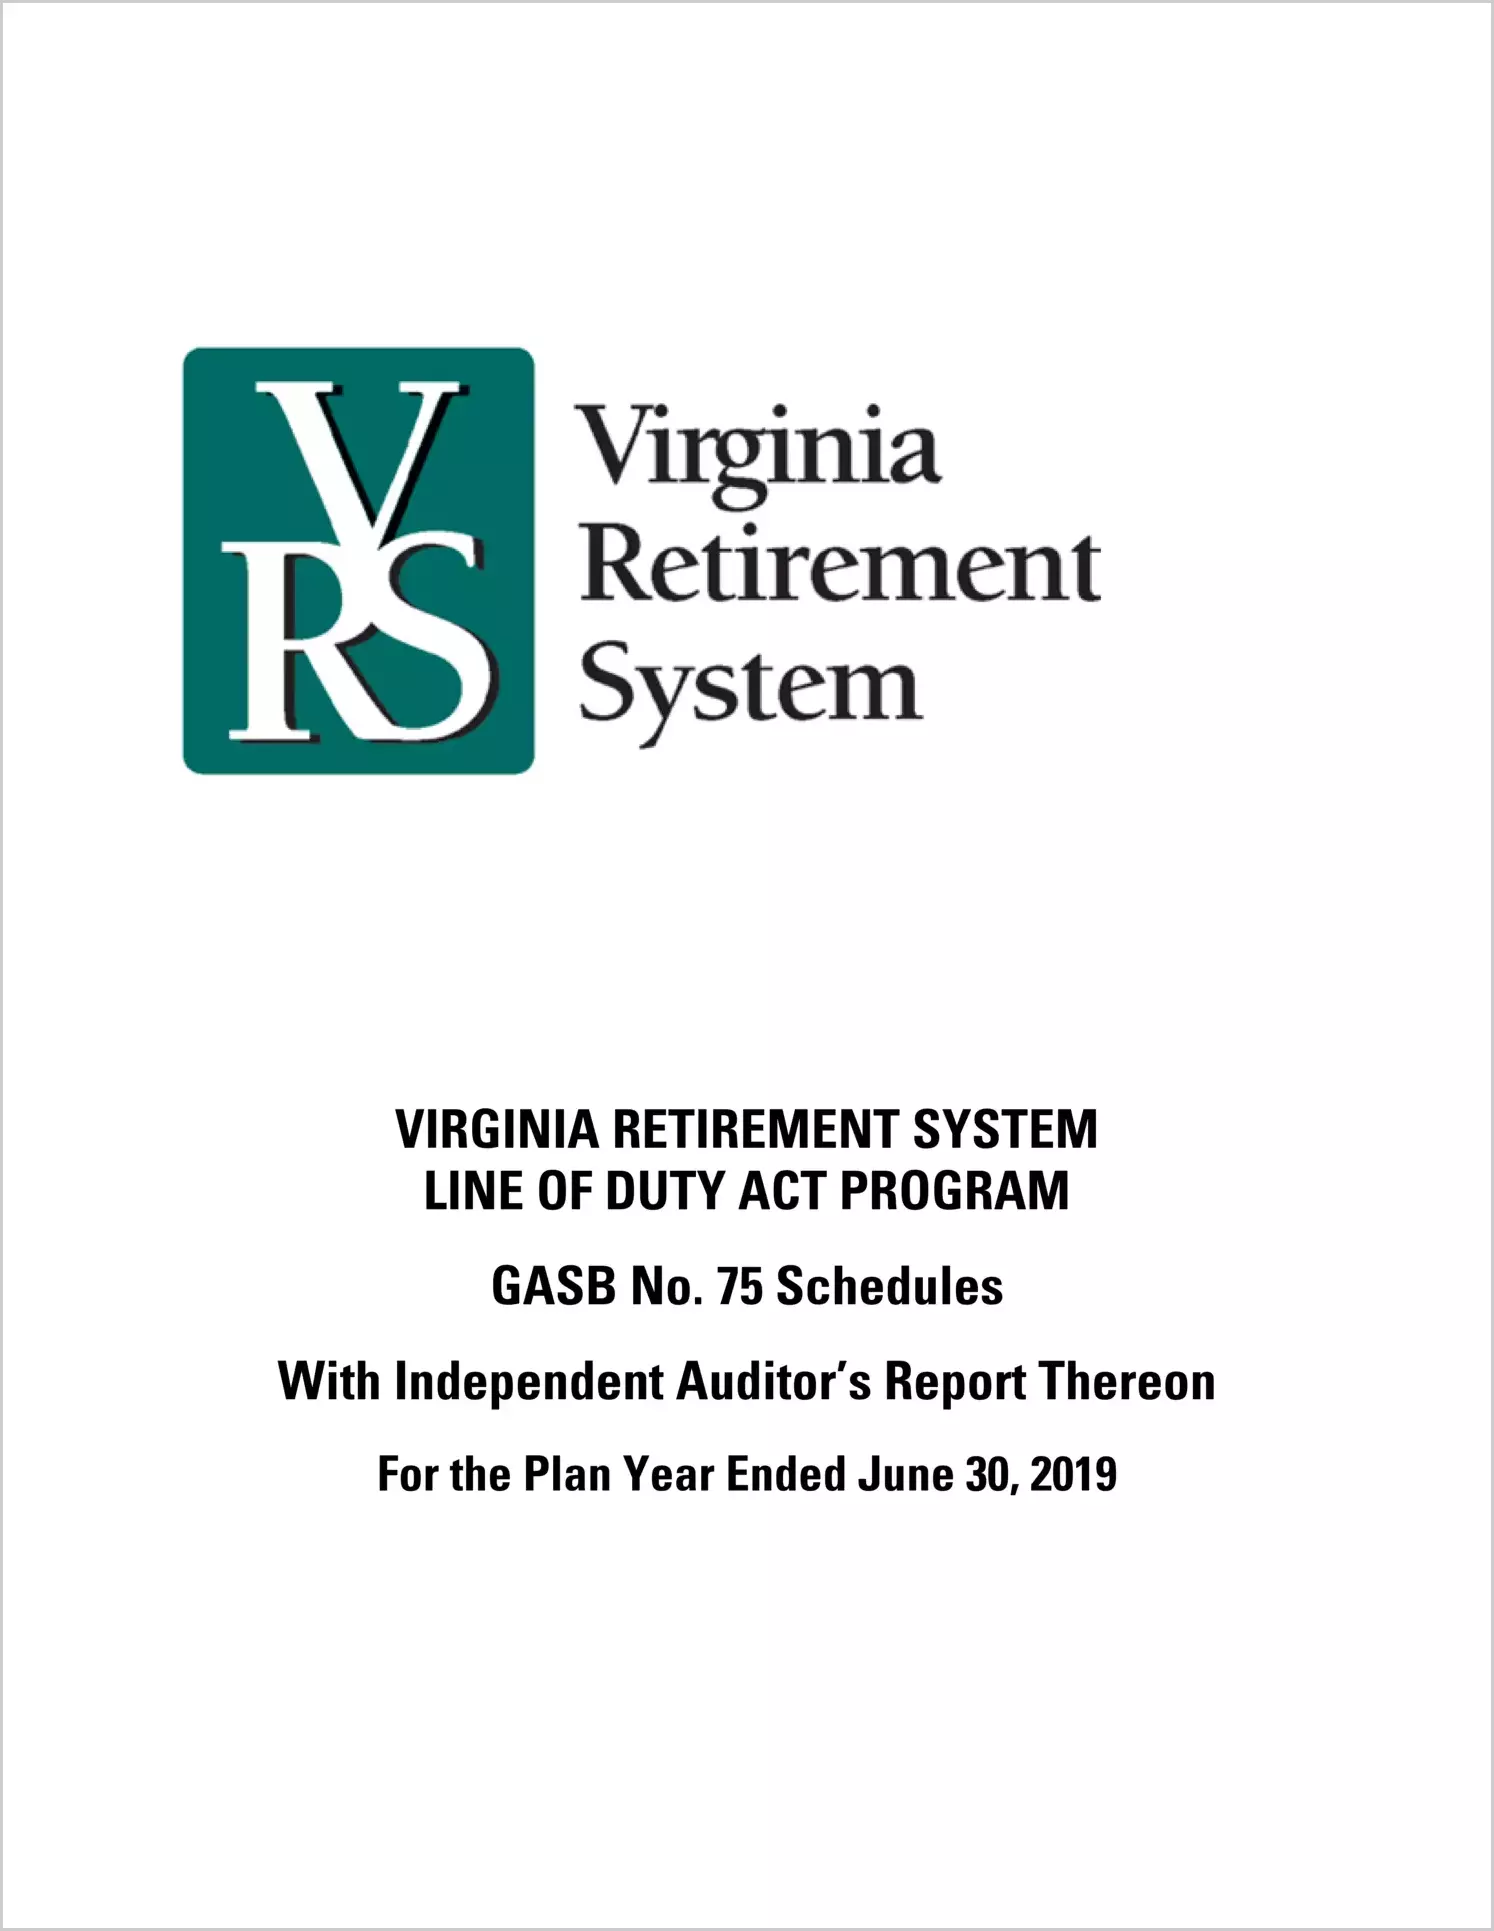 GASB 75 Schedule - Virginia Retirement System Line of Duty Act Program for the plan year ended June 30, 2019